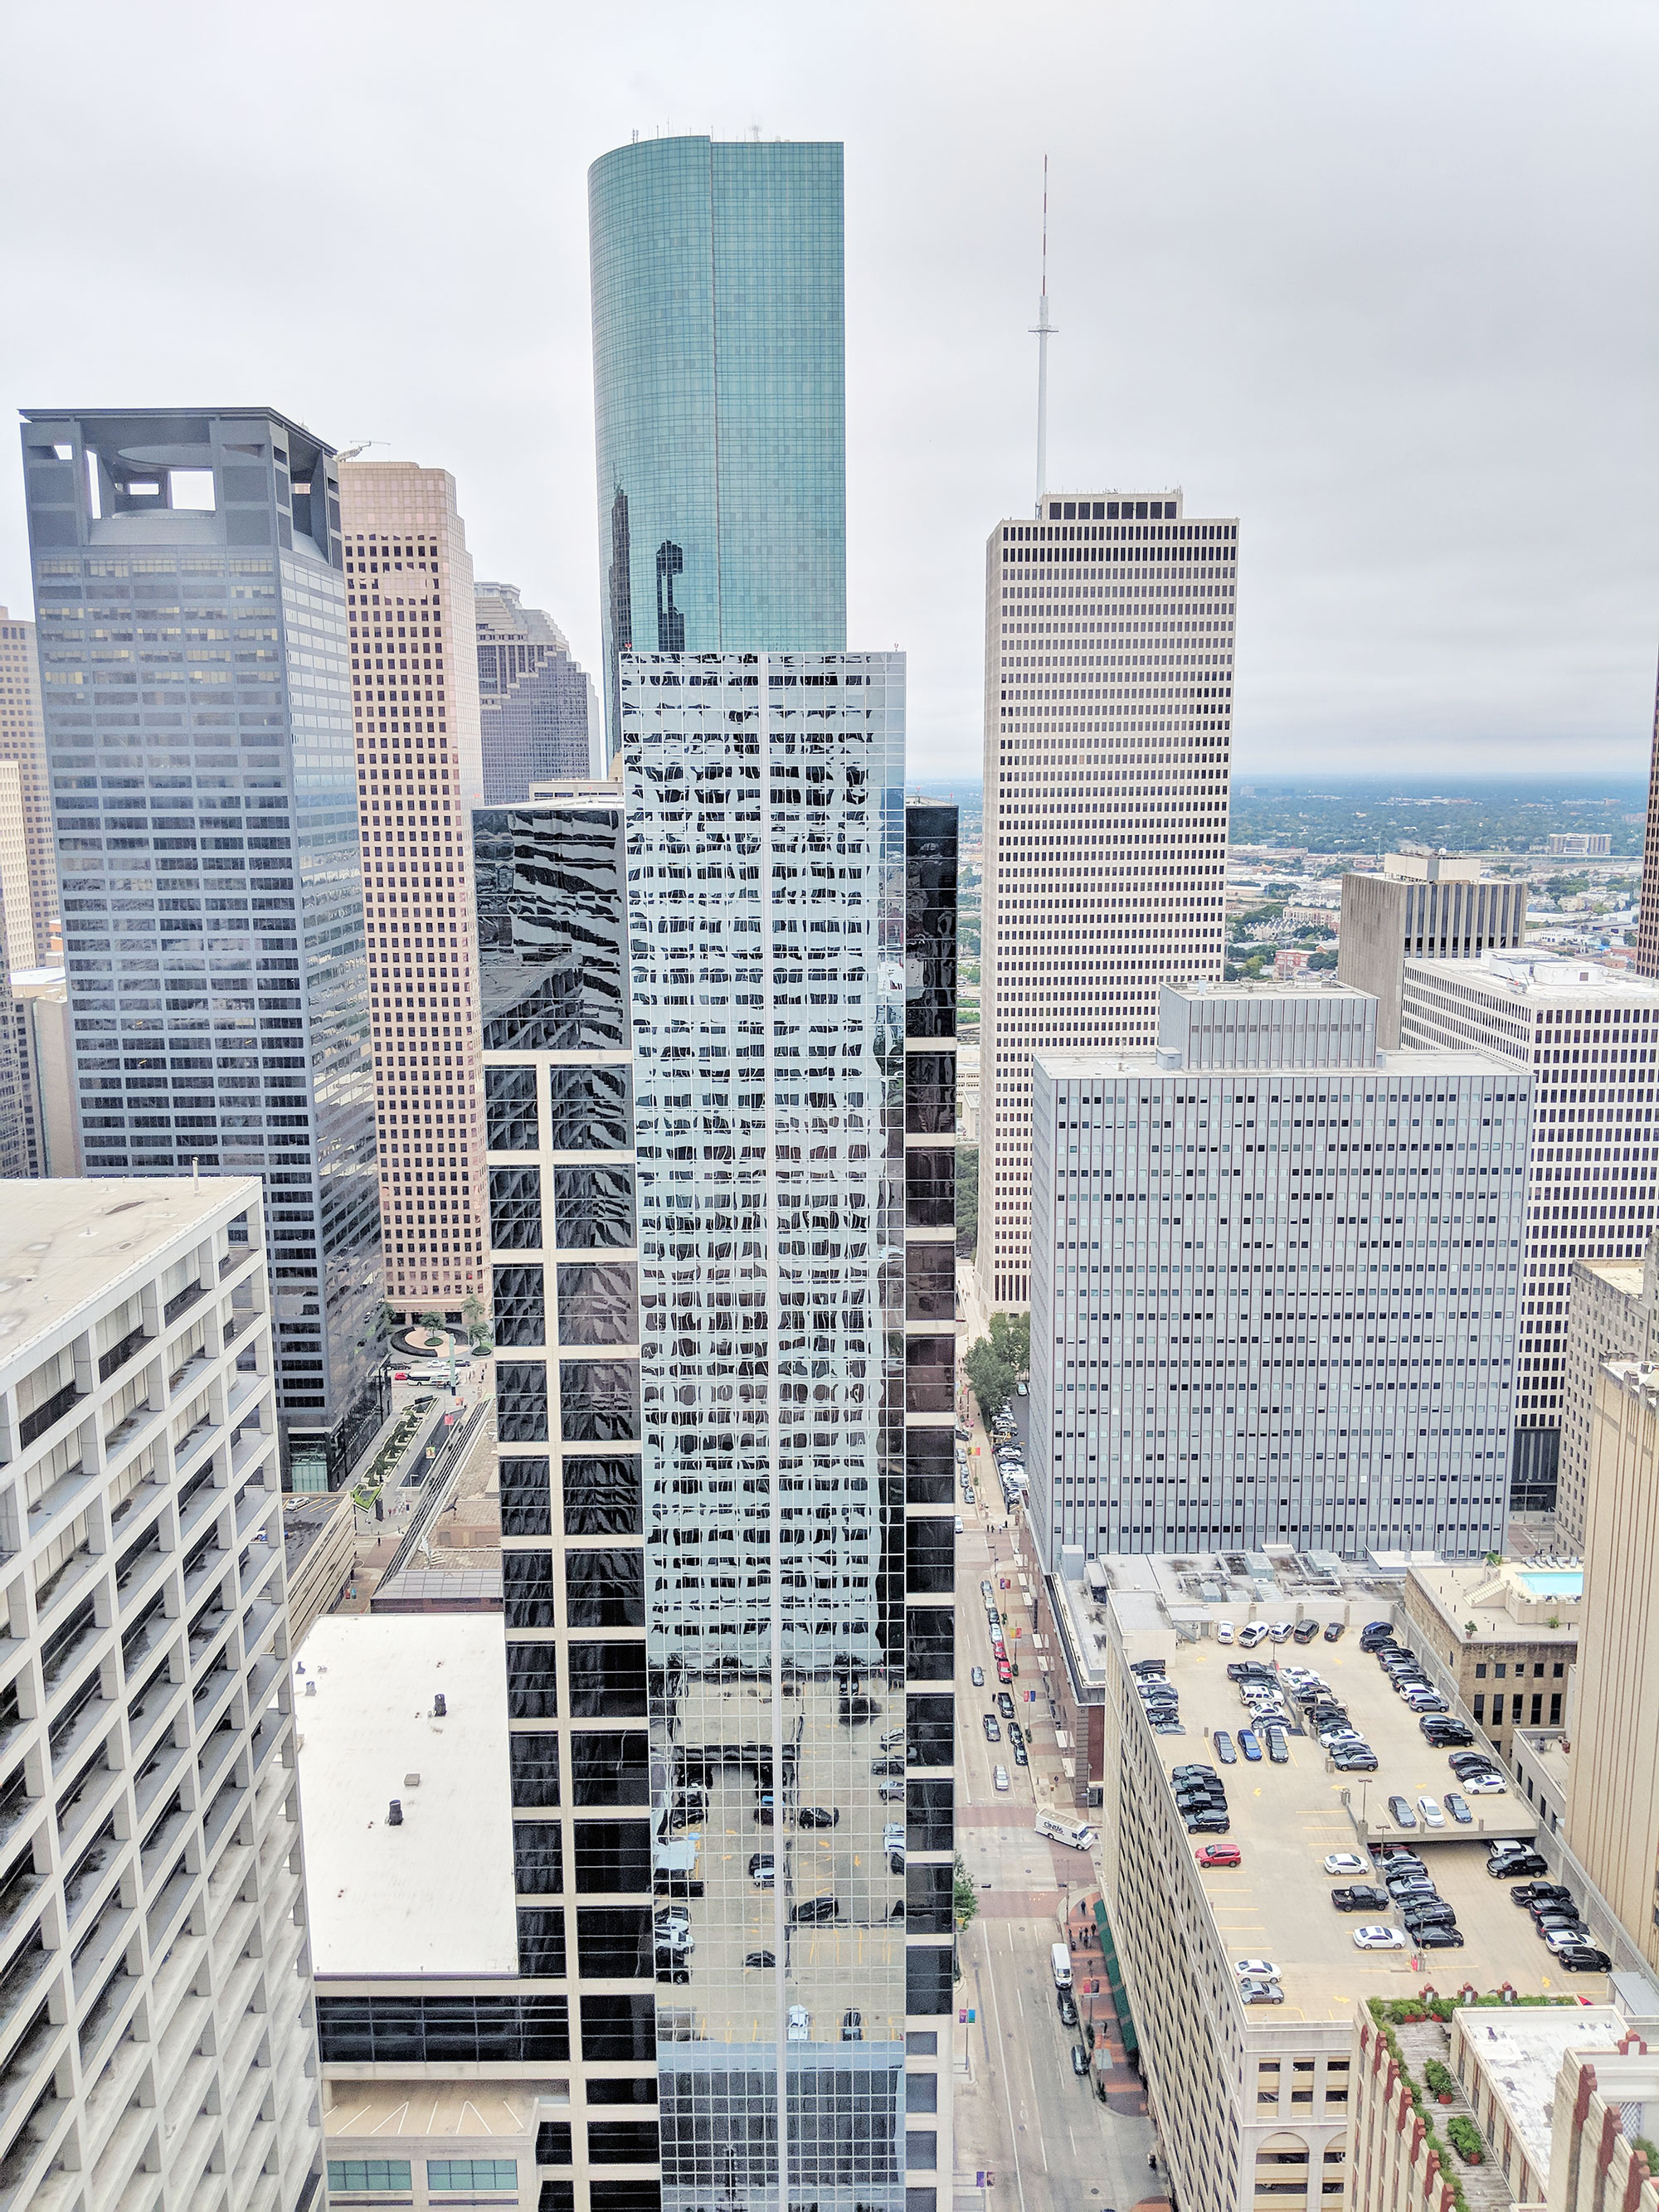 A view of downtown Houston from my office building.